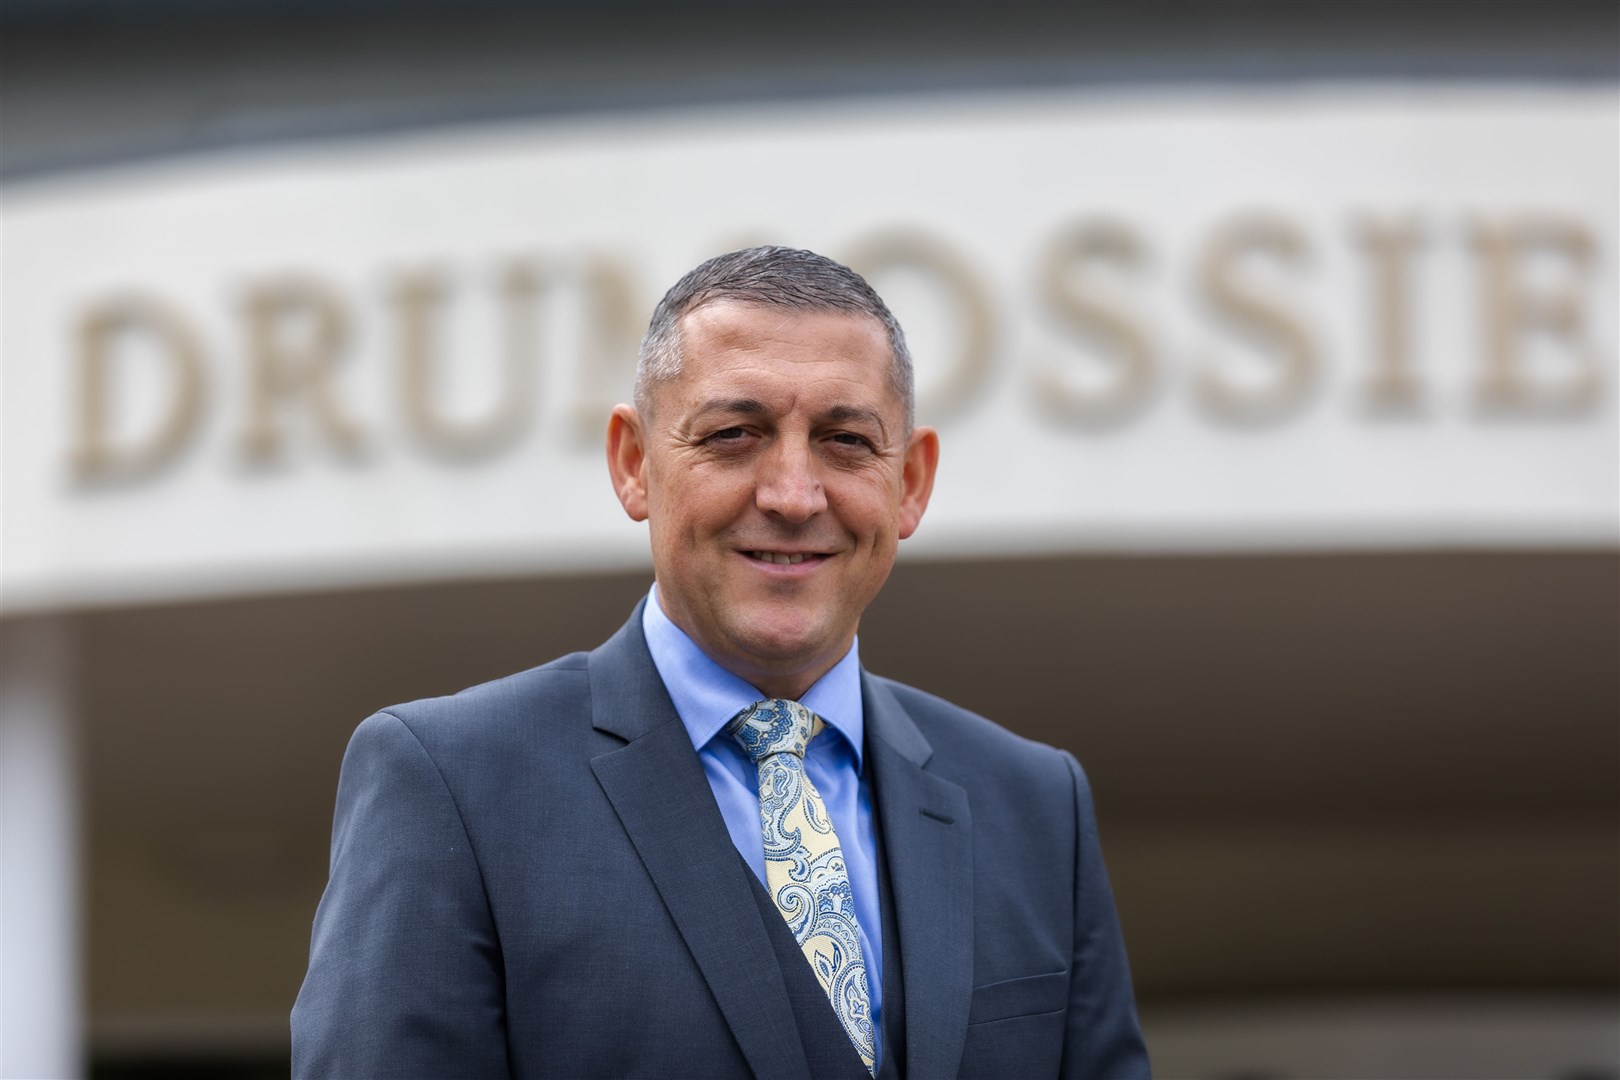 General manager at the Macdonald Drumossie Hotel, Inverness, Kenny McMillan, is looking forward to welcoming shortlistees and sponsors for the awards gala dinner and ceremony.